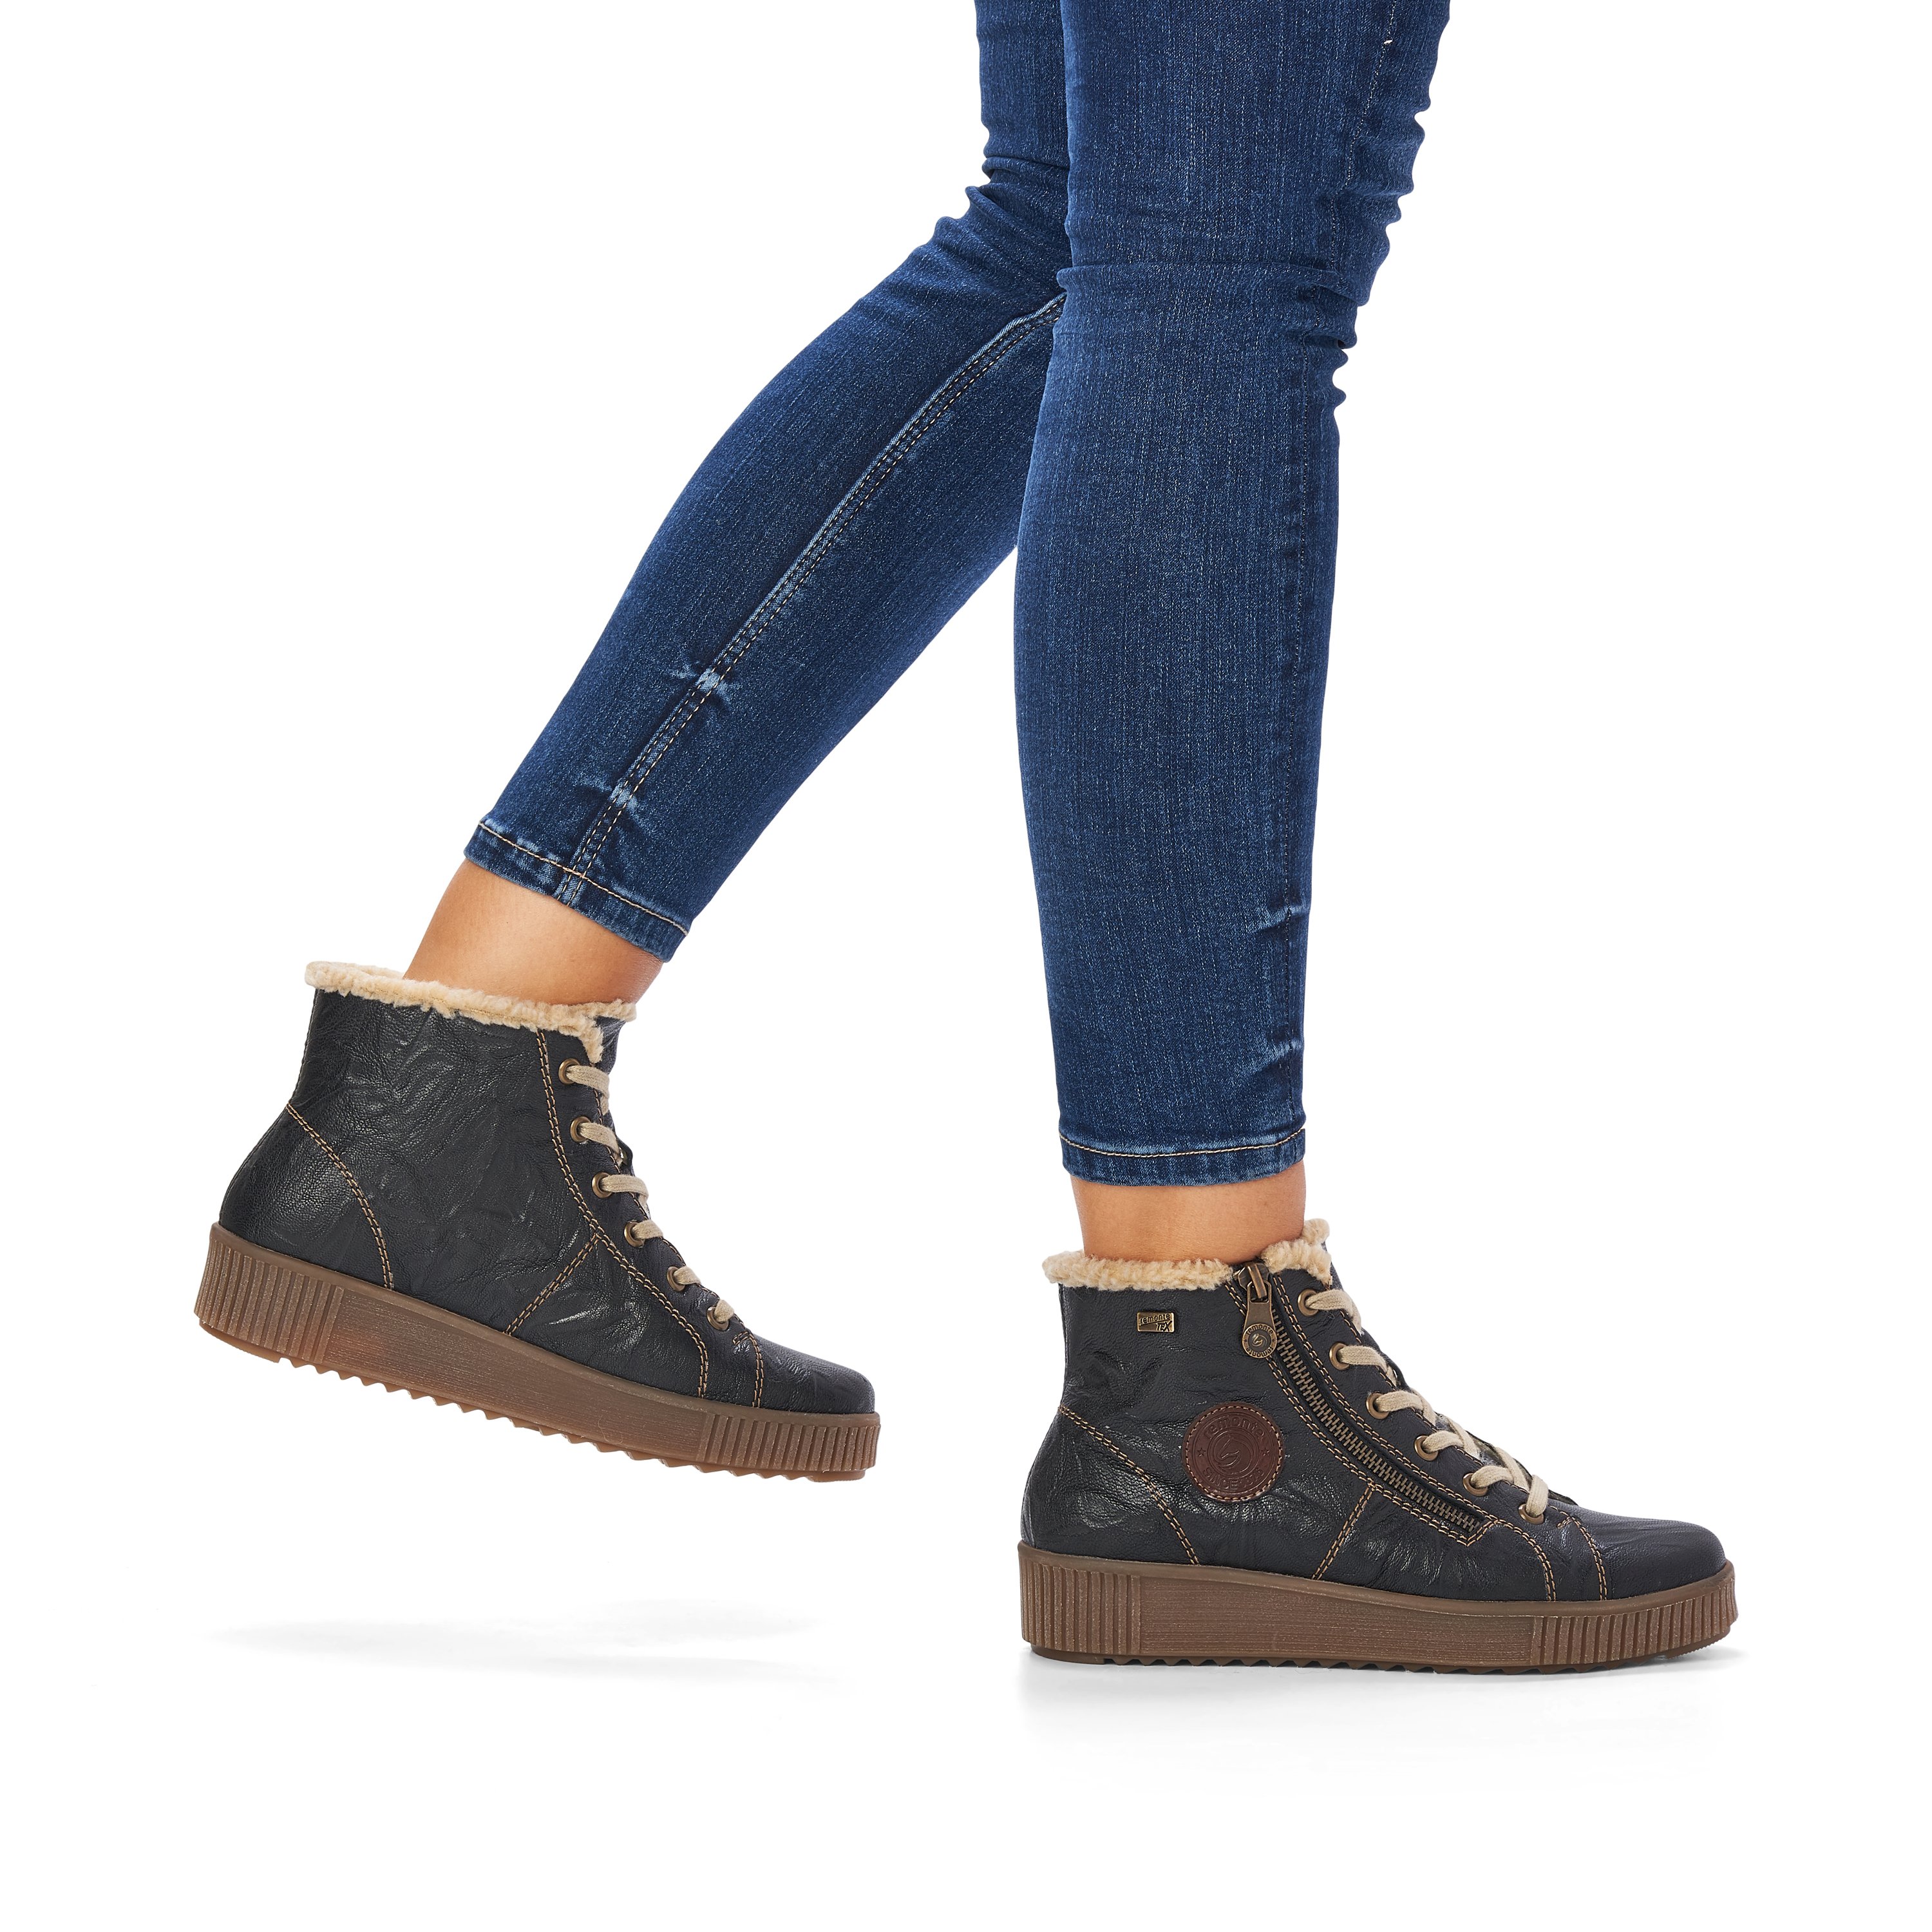 Steel black remonte women´s lace-up boots R7980-02 with cushioning platform sole. Shoe on foot